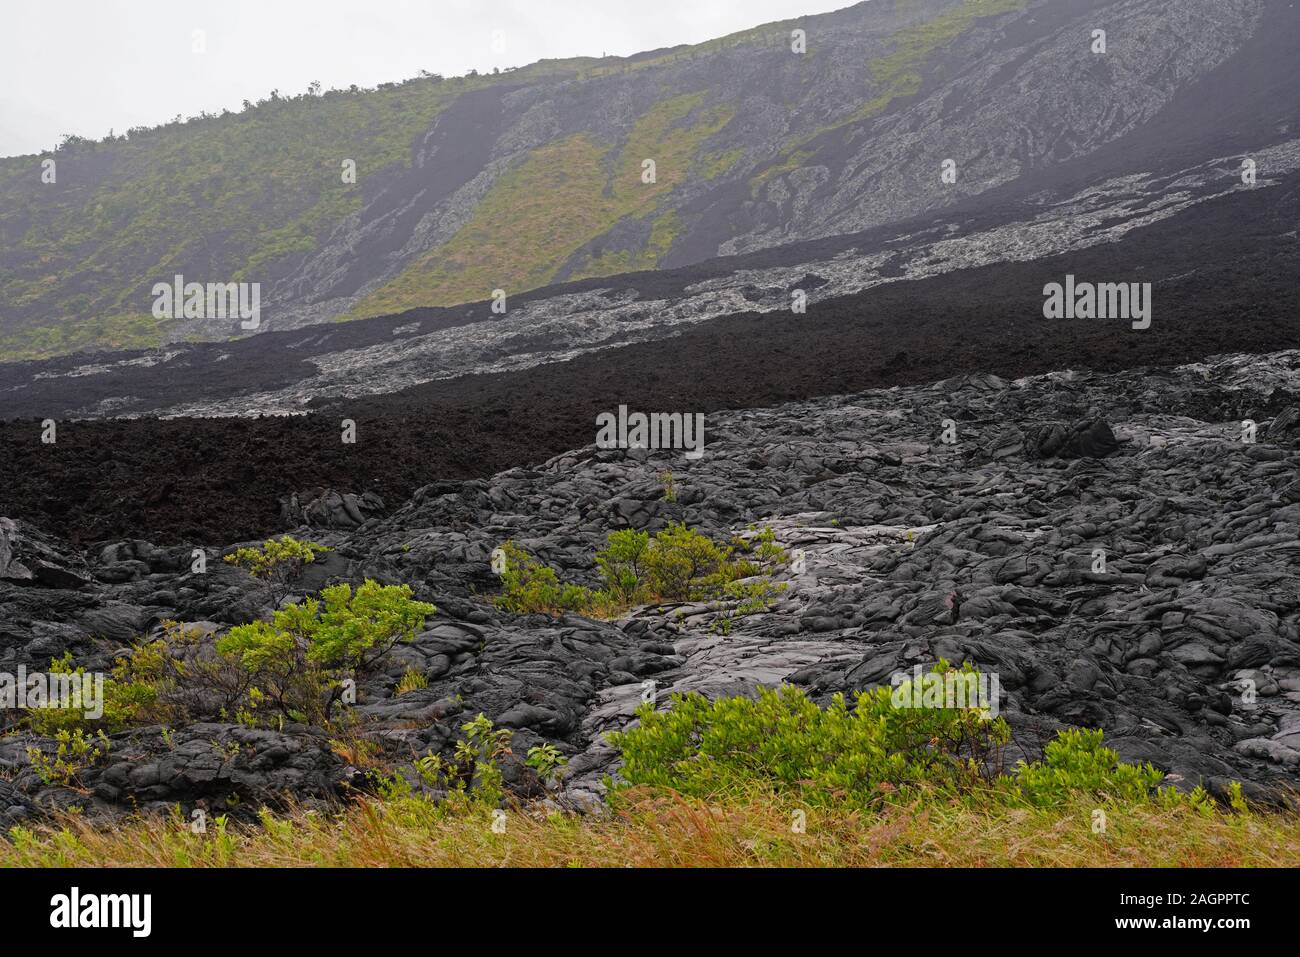 Lava field with recent and older flows from Kilauea active volcano in Volcanoes National Park, Big Island of Hawai'i. Stock Photo